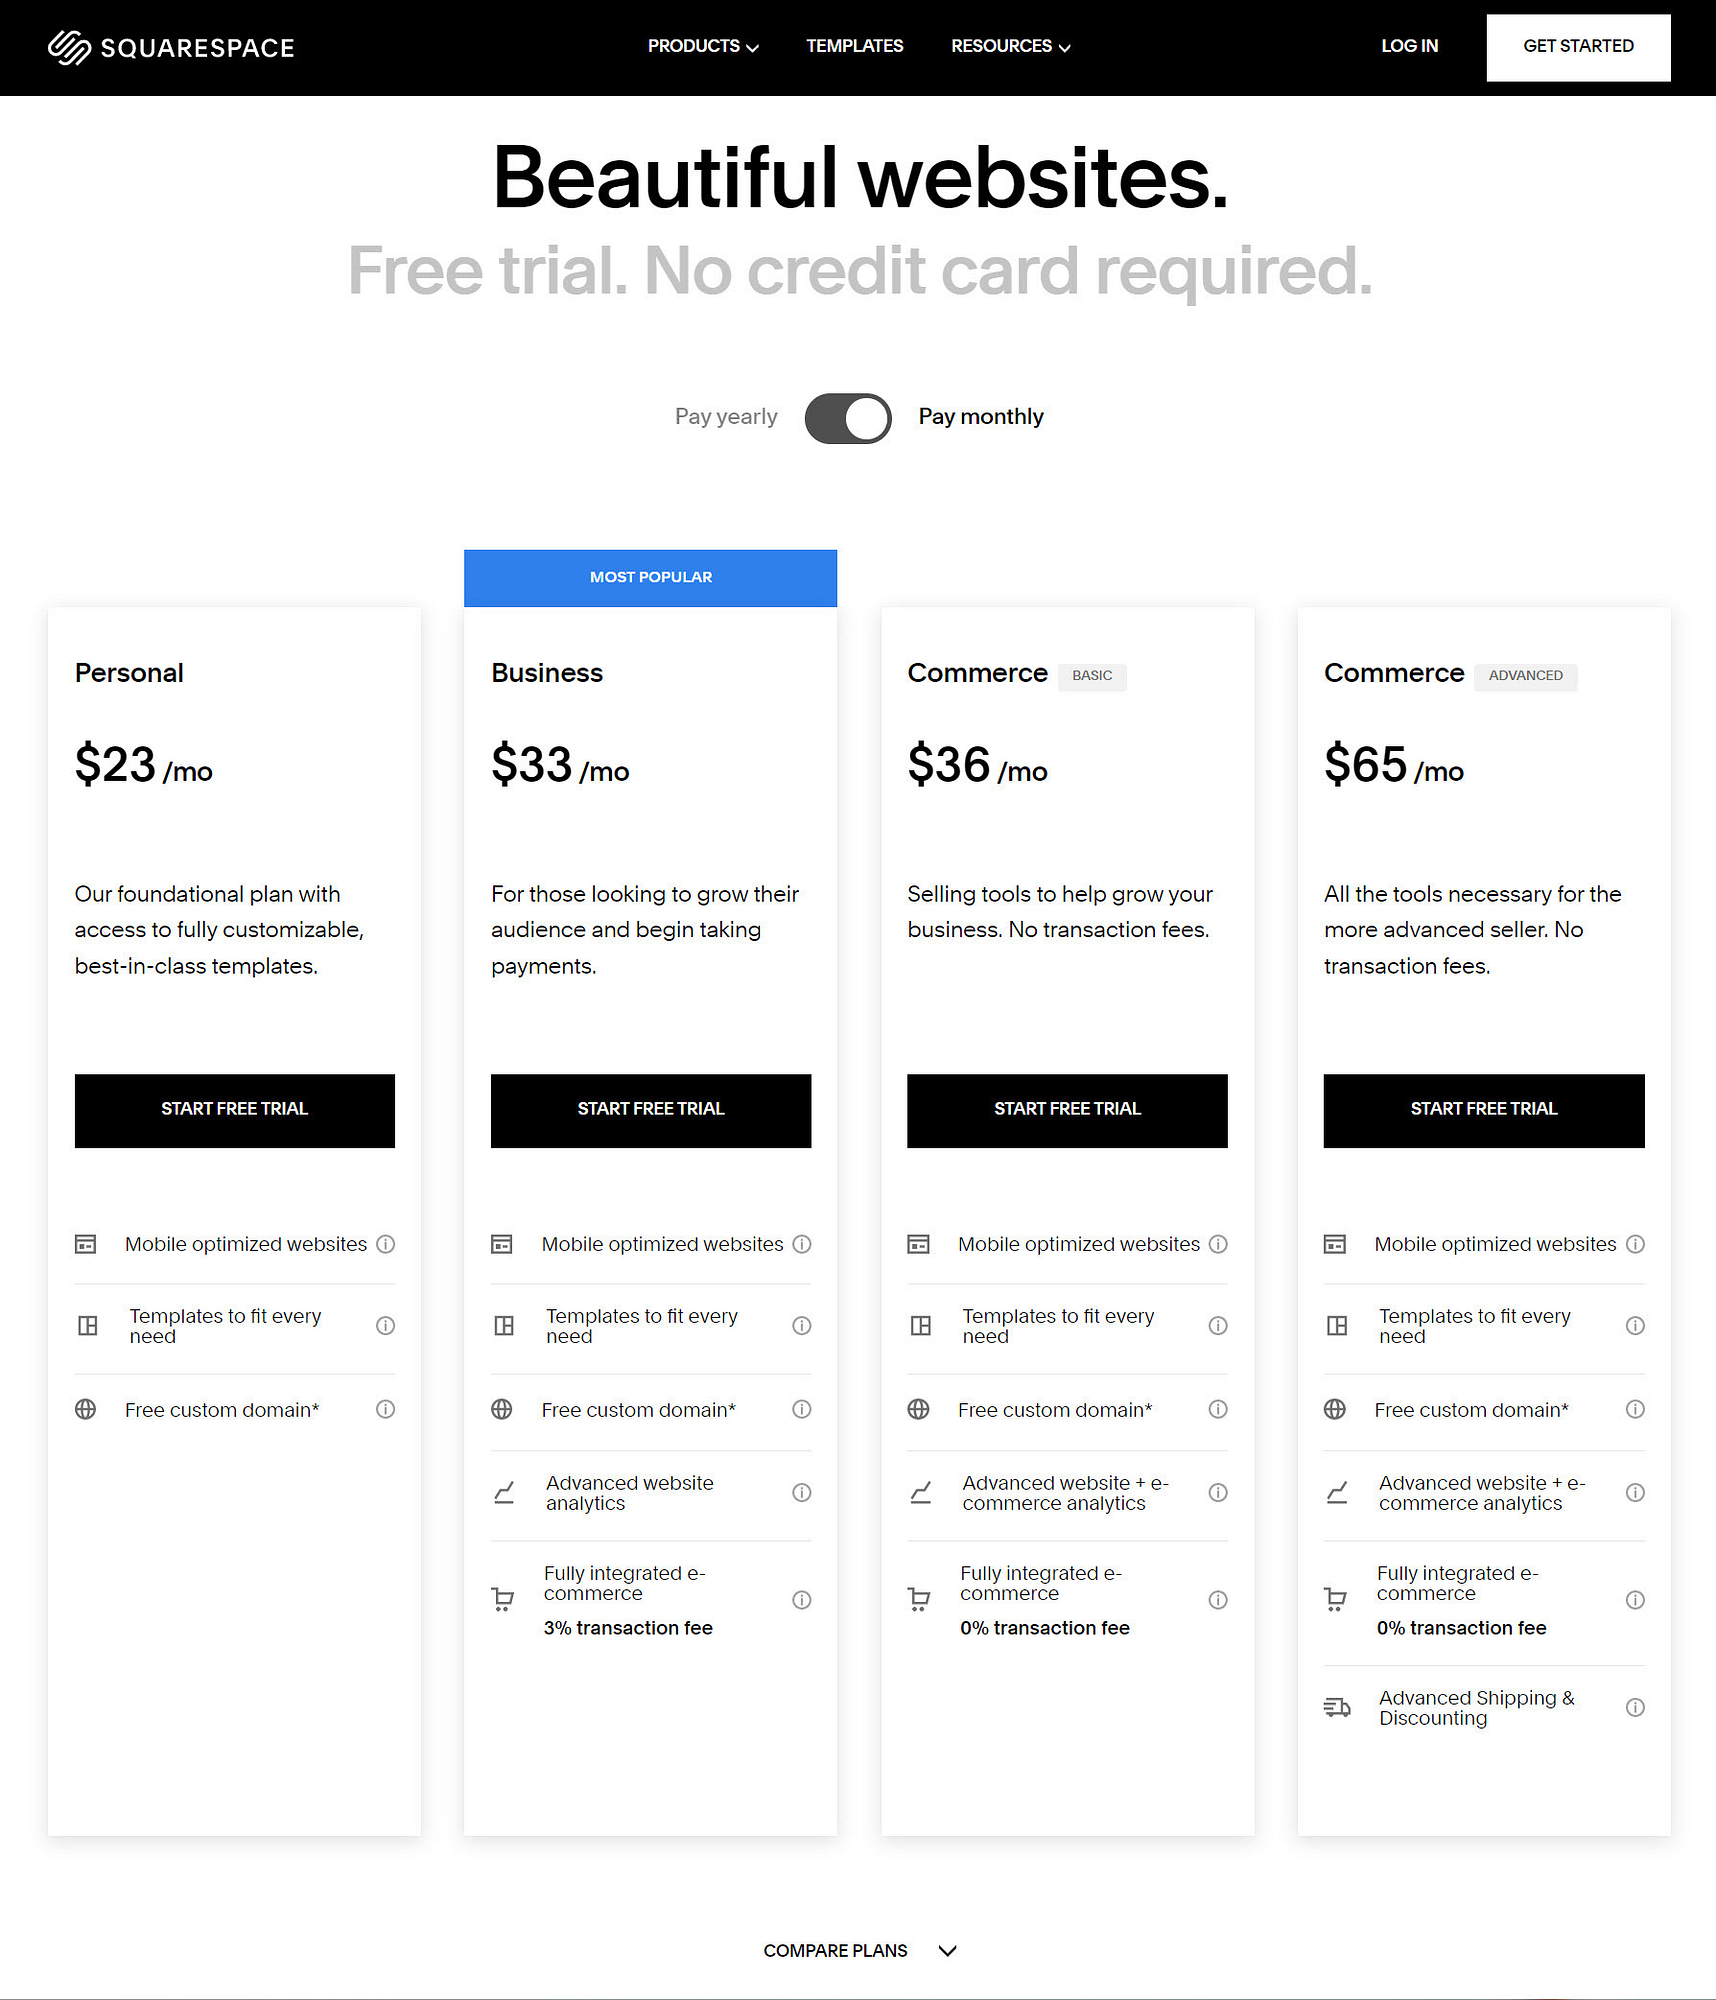 Squarespace’s pricing table